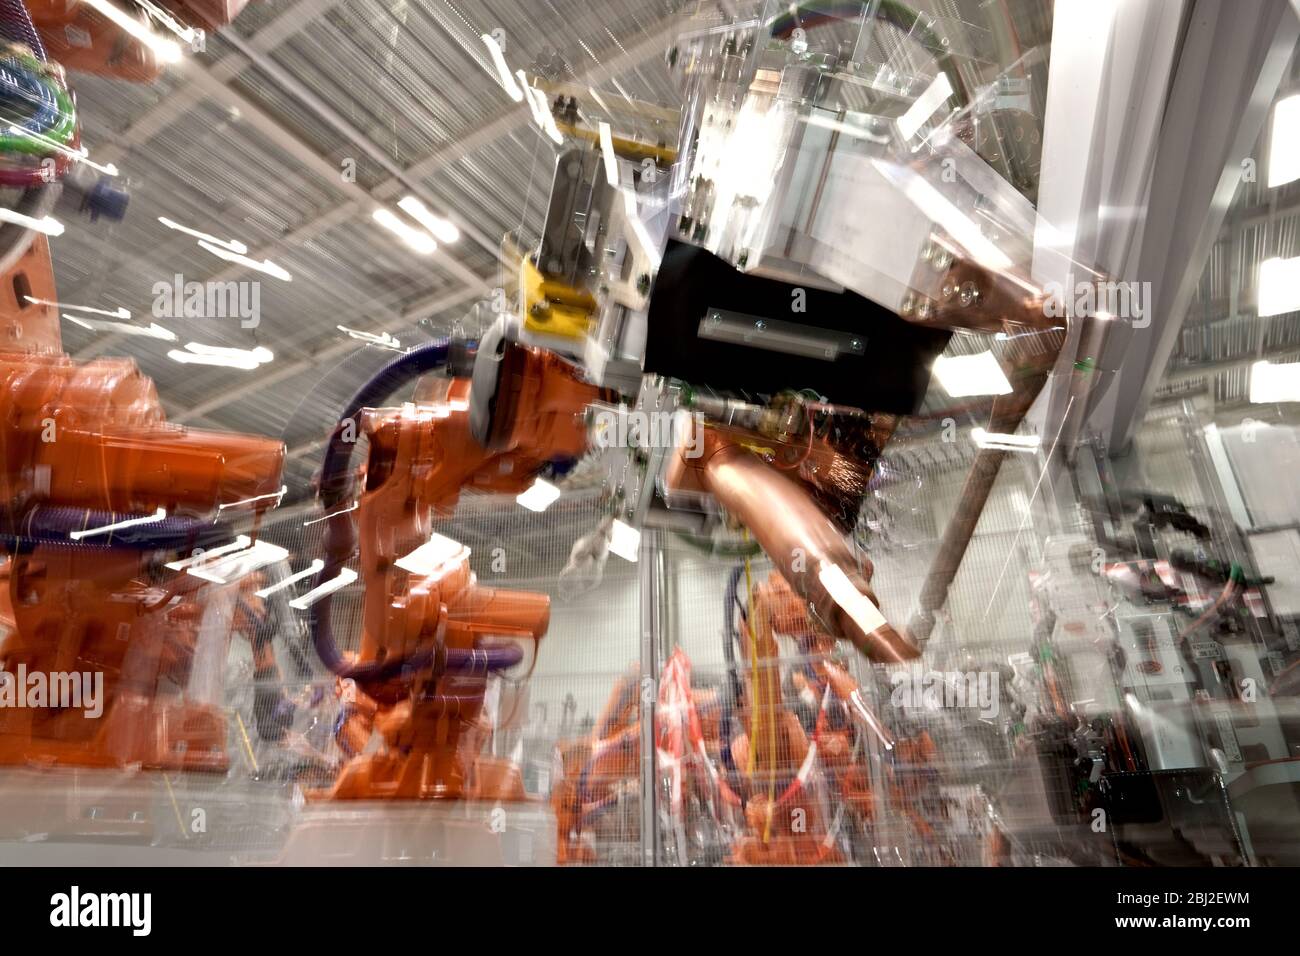 Robotic manipulator arm with spot welding attachment as used in vehicle assembly Stock Photo